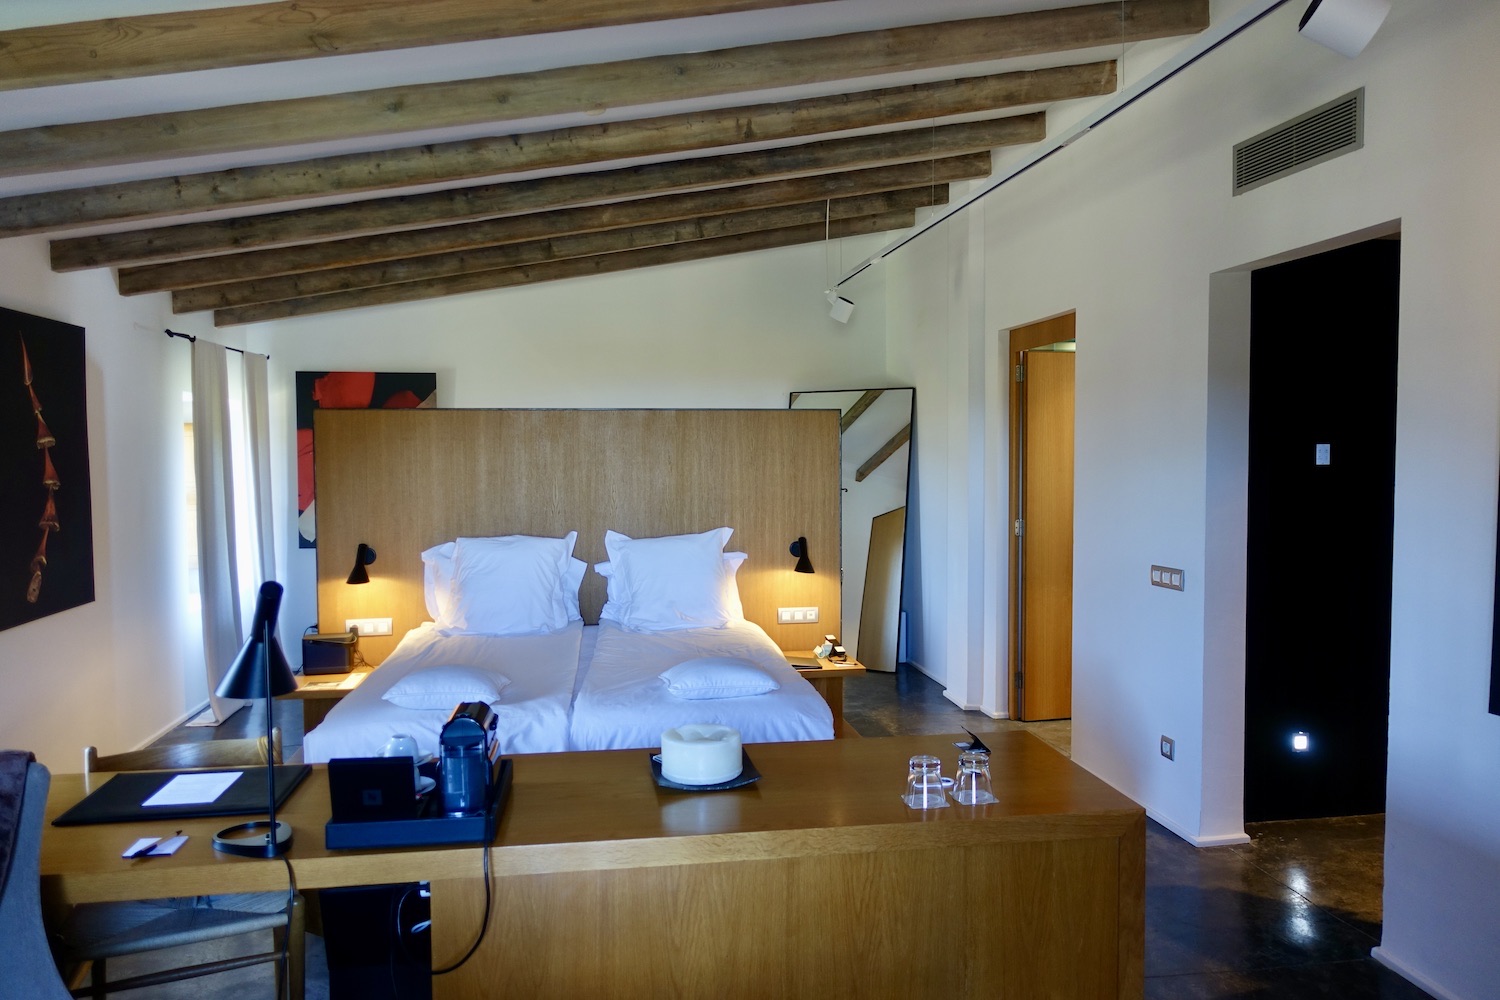 Junior Suite w/Terrace at Hotel Son Brull Pollença Mallorca/Spain/staying & dining in style in Mallorca's north